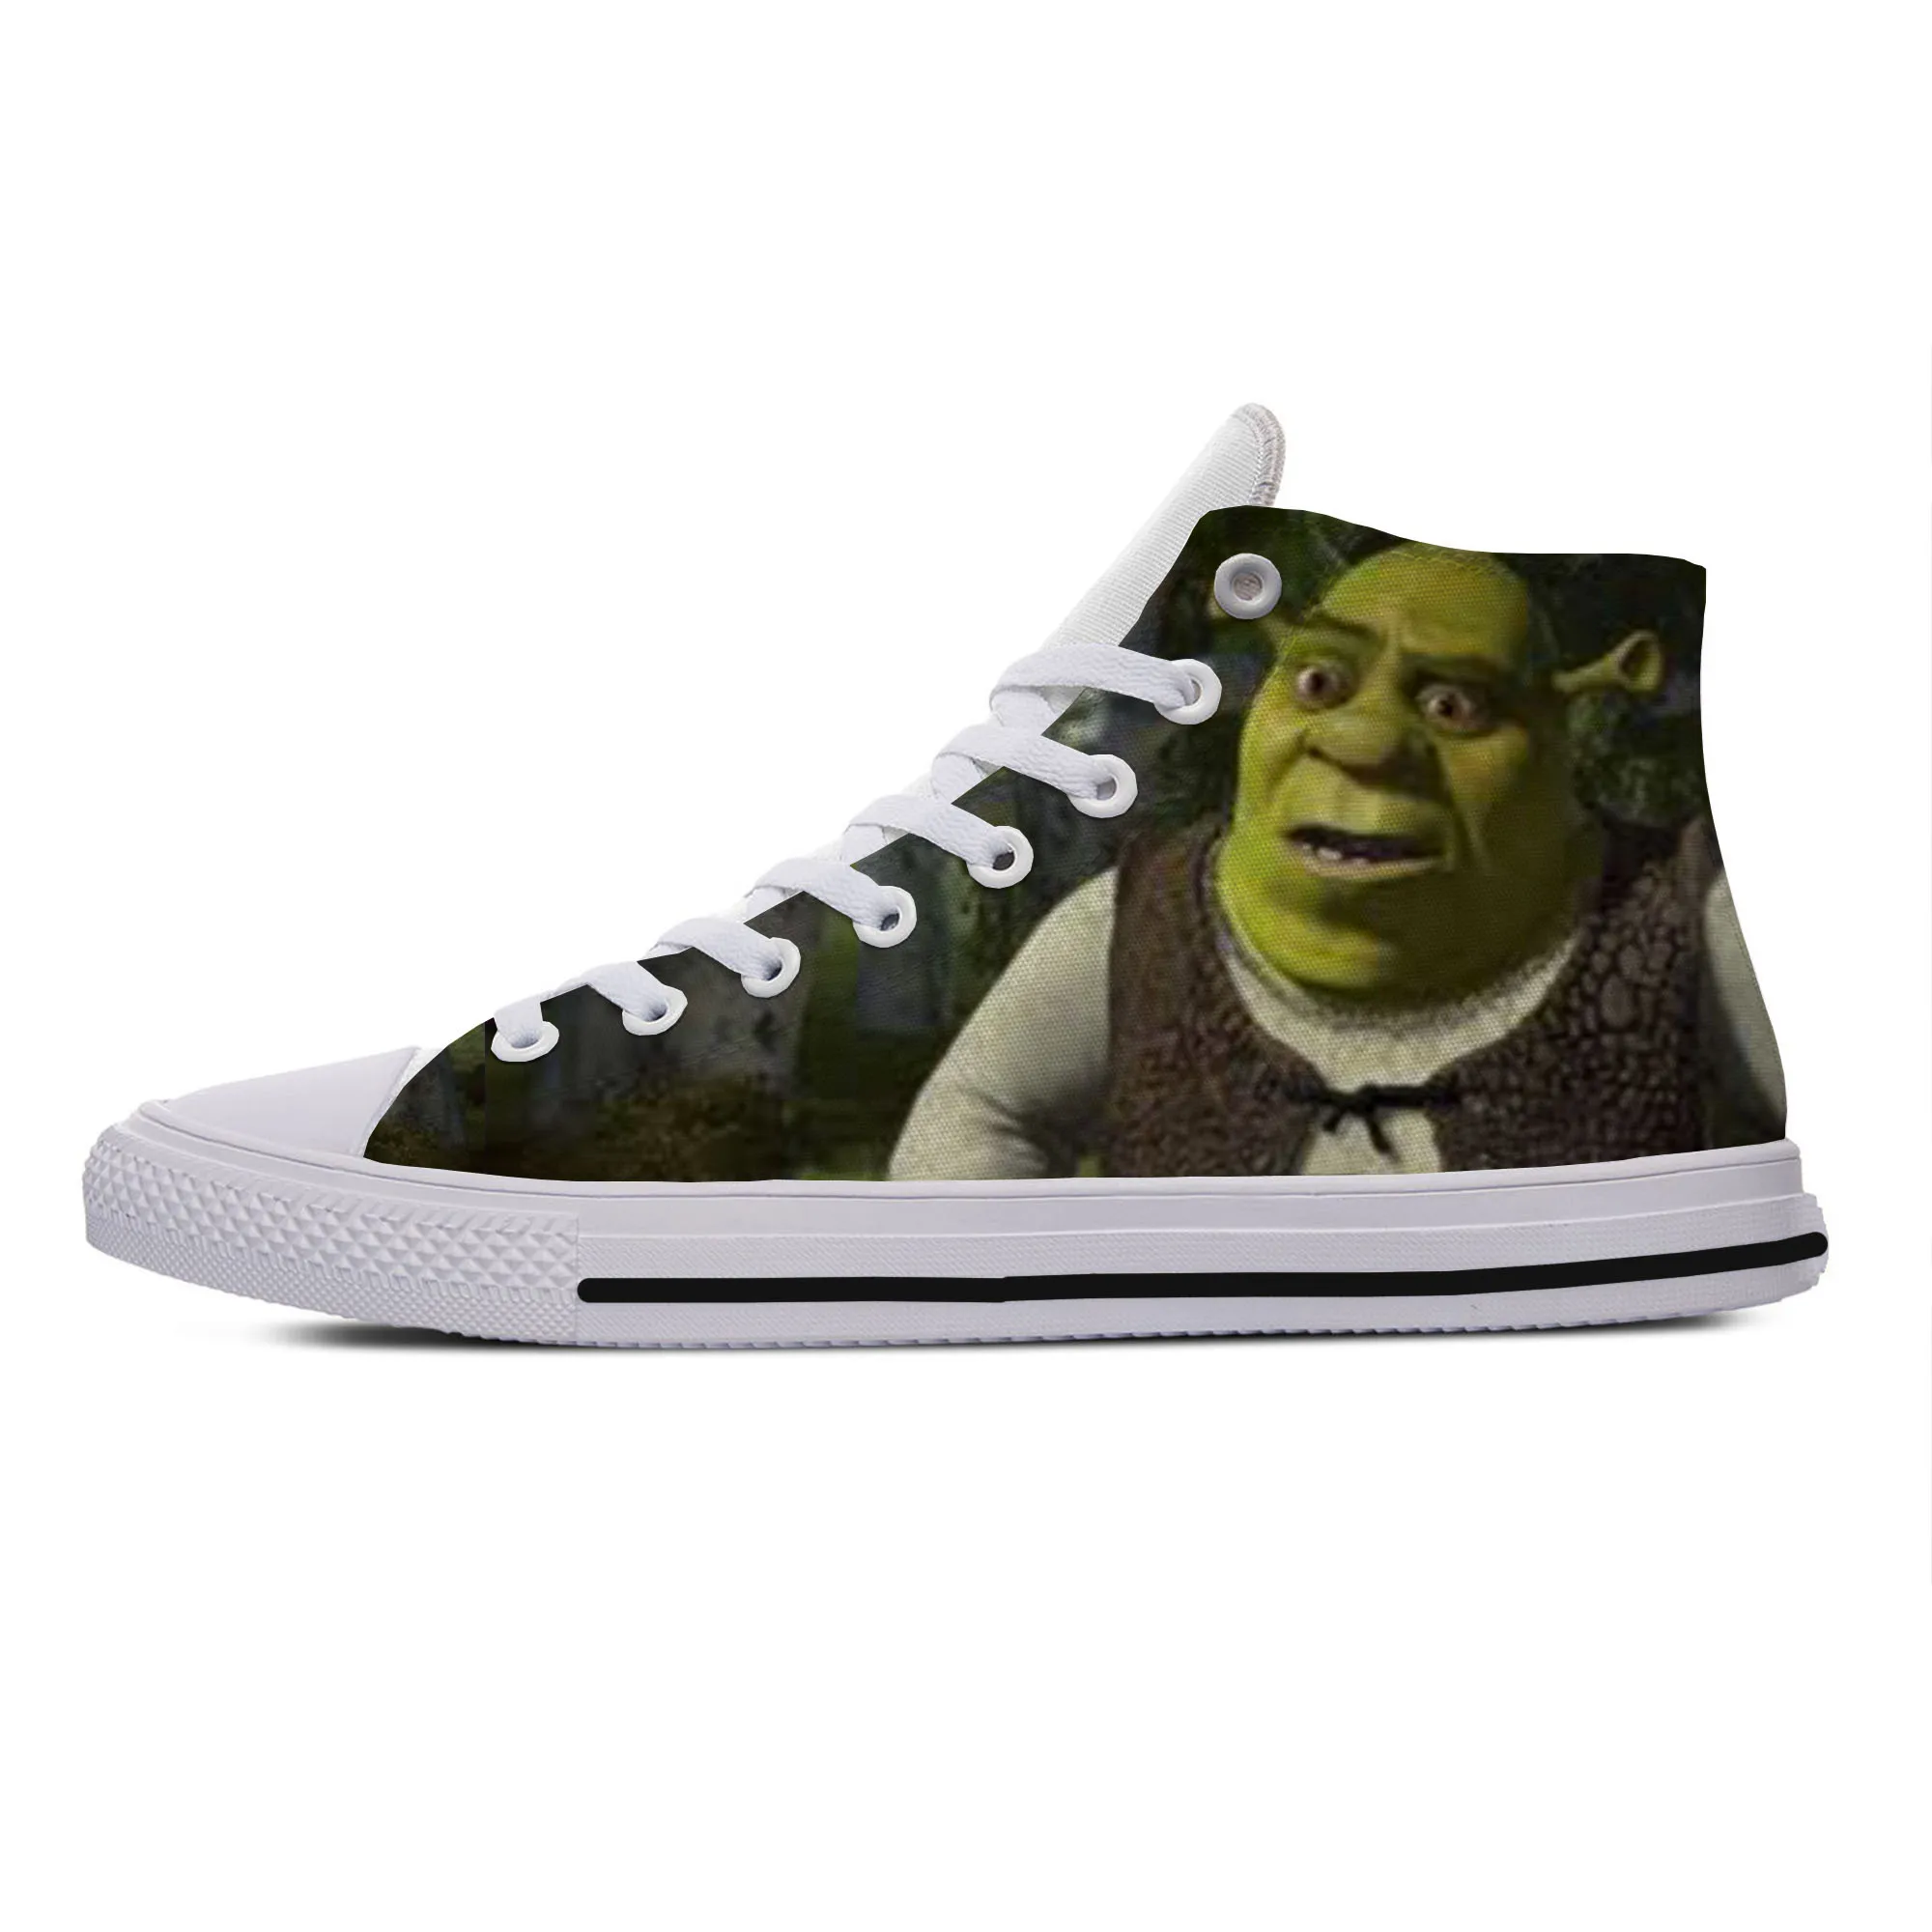 2019 Hot Cool Fashion New Summer Sneakers Handiness Casual Shoes 3D Printed Cartoon Cute Funny Fantasy Movie For Men Women Shrek